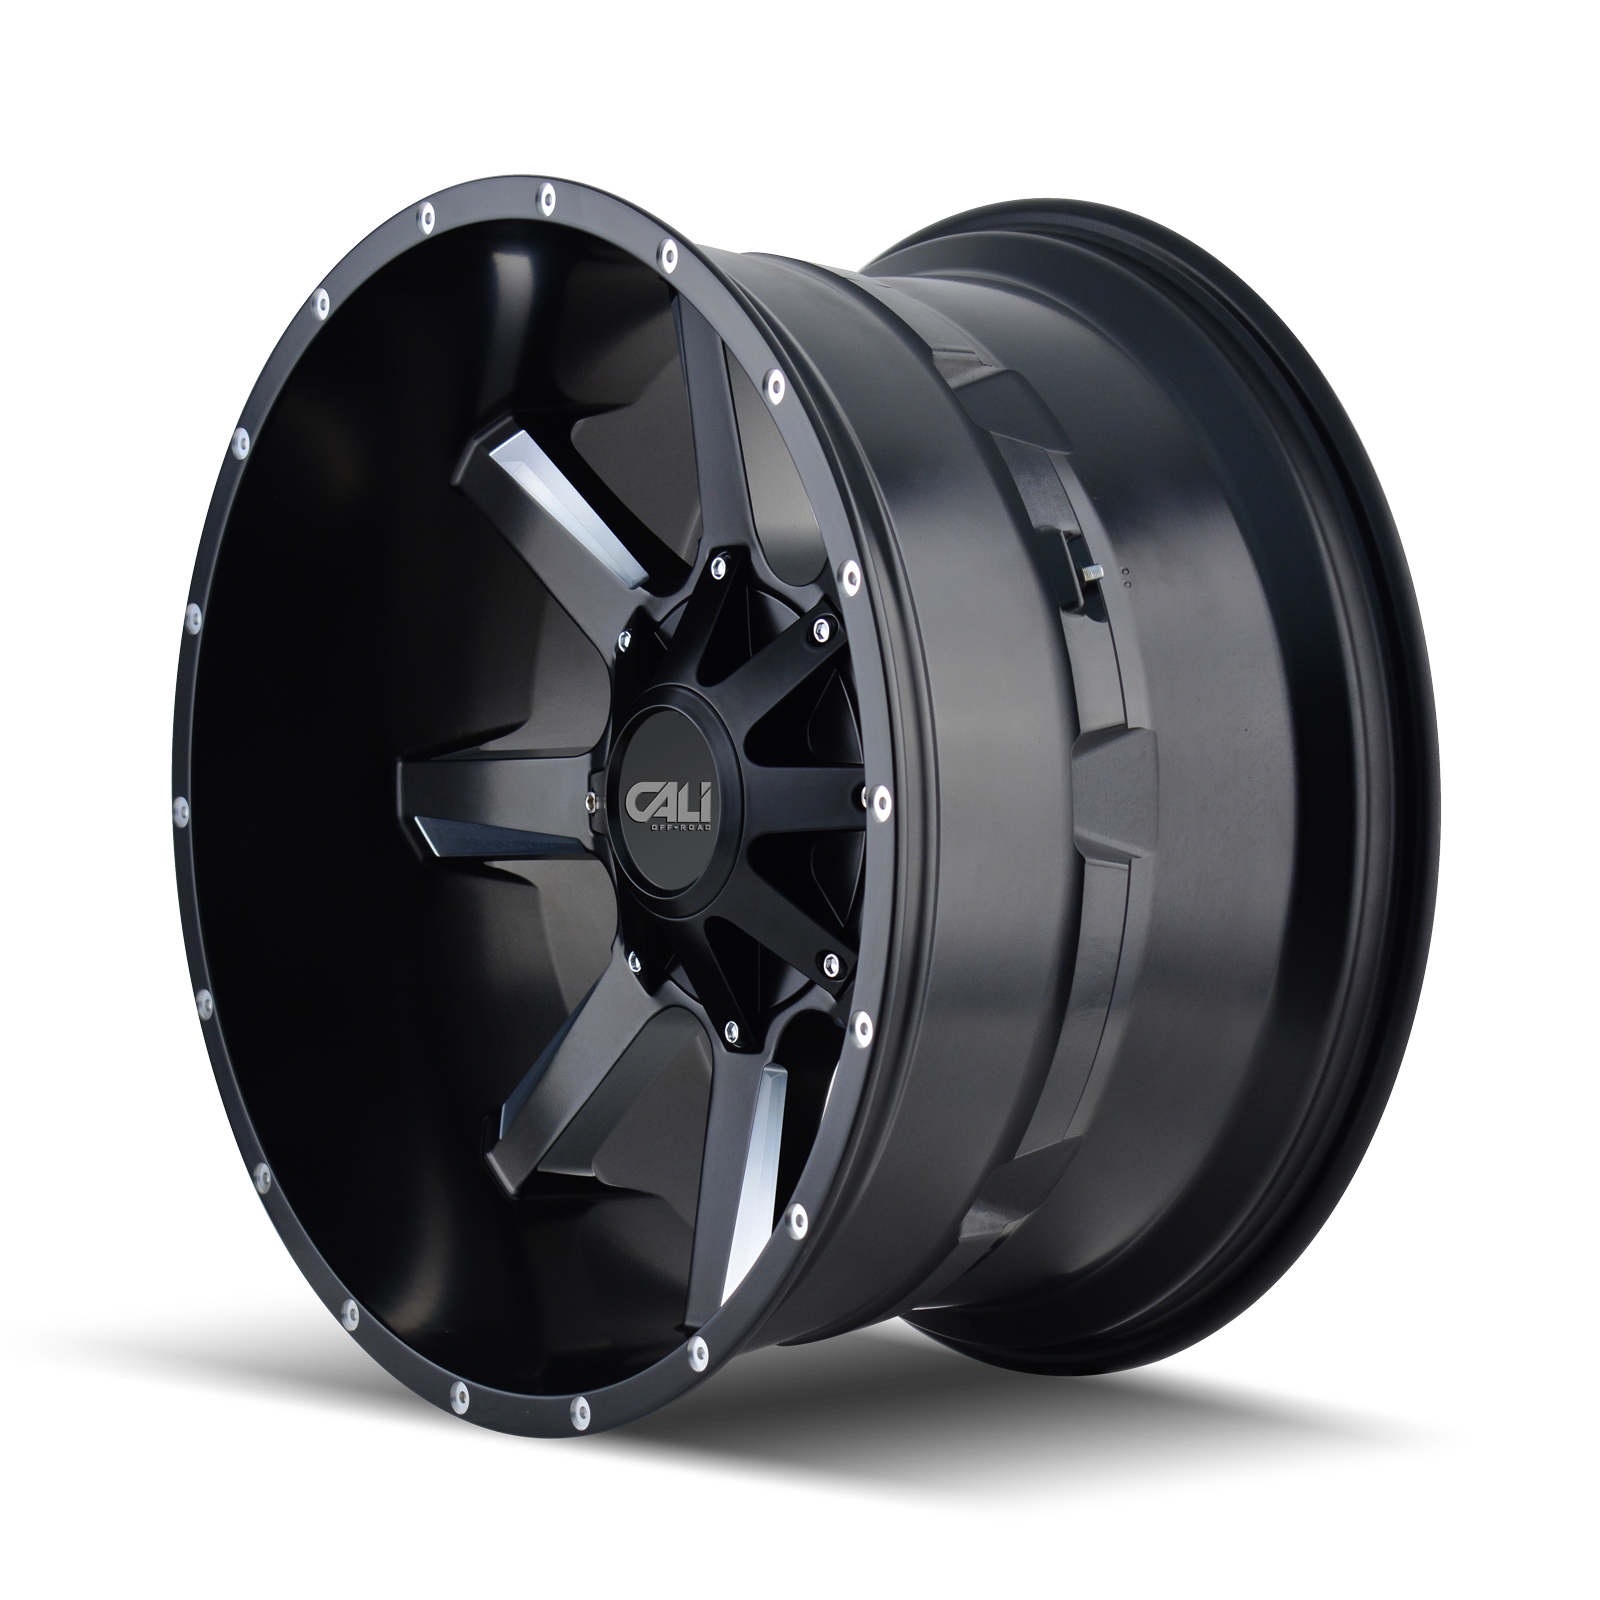 Cali Off-road BUSTED Satin black milled 20x9 +18 6x135|6x139.7mm 106mm